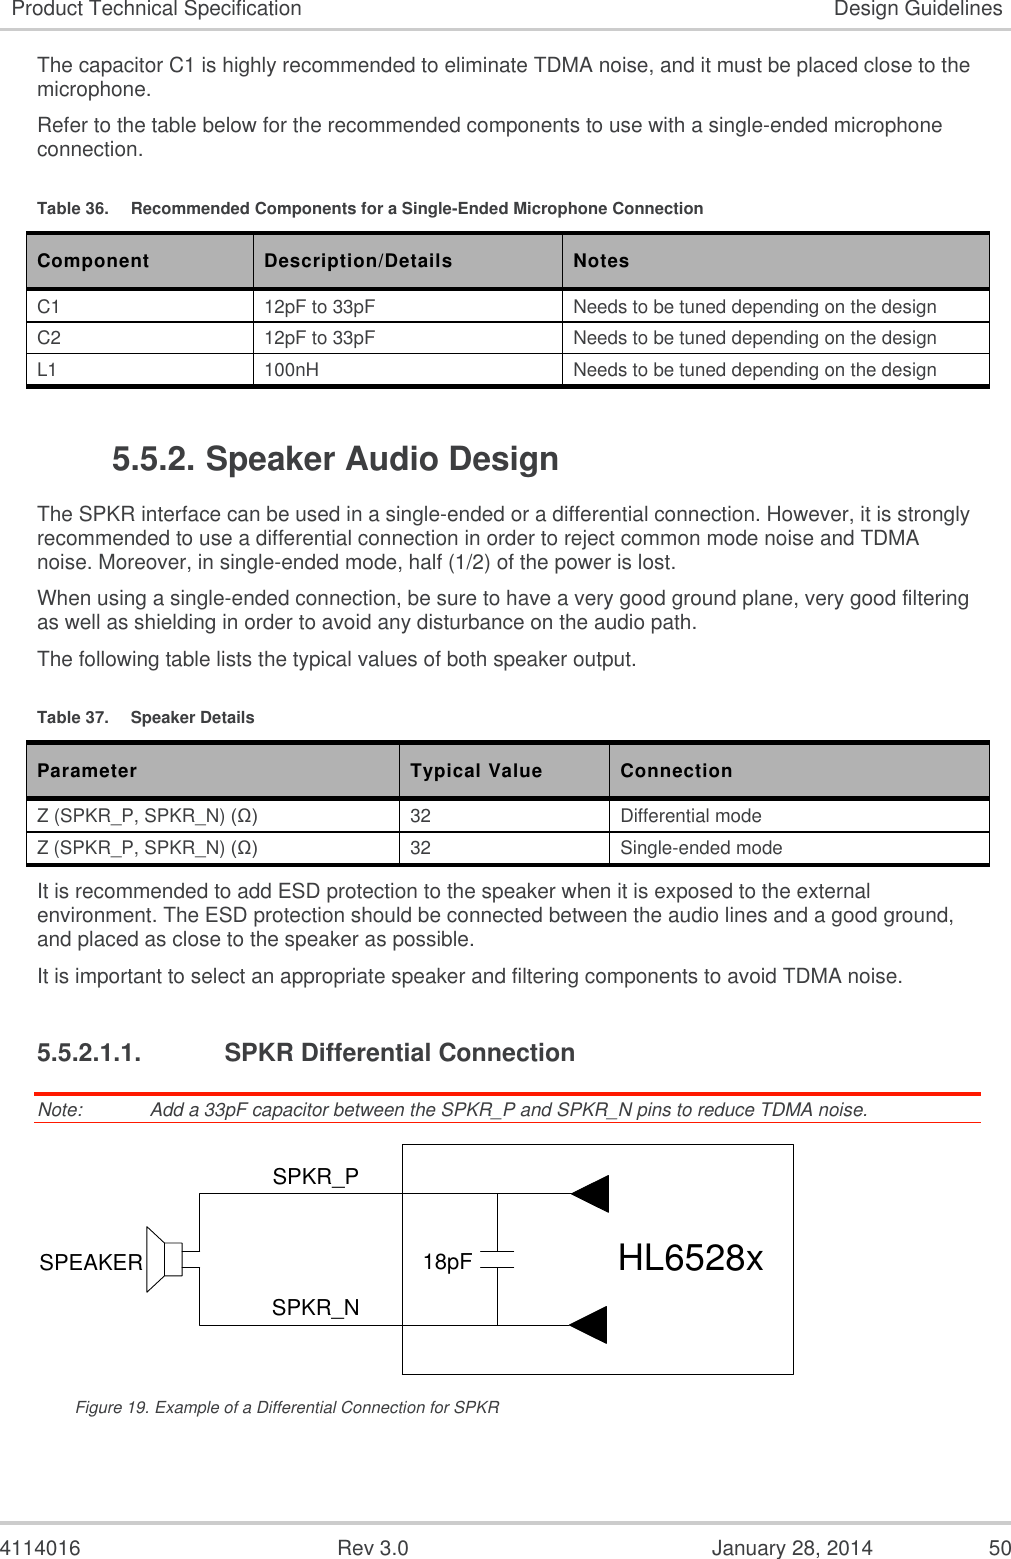  4114016  Rev 3.0  January 28, 2014  50 Product Technical Specification Design Guidelines The capacitor C1 is highly recommended to eliminate TDMA noise, and it must be placed close to the microphone. Refer to the table below for the recommended components to use with a single-ended microphone connection. Table 36.  Recommended Components for a Single-Ended Microphone Connection Component Description/Details Notes C1 12pF to 33pF Needs to be tuned depending on the design C2 12pF to 33pF Needs to be tuned depending on the design L1 100nH Needs to be tuned depending on the design 5.5.2. Speaker Audio Design The SPKR interface can be used in a single-ended or a differential connection. However, it is strongly recommended to use a differential connection in order to reject common mode noise and TDMA noise. Moreover, in single-ended mode, half (1/2) of the power is lost. When using a single-ended connection, be sure to have a very good ground plane, very good filtering as well as shielding in order to avoid any disturbance on the audio path. The following table lists the typical values of both speaker output. Table 37.  Speaker Details Parameter Typical Value Connection Z (SPKR_P, SPKR_N) (Ω) 32 Differential mode Z (SPKR_P, SPKR_N) (Ω) 32 Single-ended mode It is recommended to add ESD protection to the speaker when it is exposed to the external environment. The ESD protection should be connected between the audio lines and a good ground, and placed as close to the speaker as possible. It is important to select an appropriate speaker and filtering components to avoid TDMA noise. 5.5.2.1.1.  SPKR Differential Connection Note:   Add a 33pF capacitor between the SPKR_P and SPKR_N pins to reduce TDMA noise. 18pFSPKR_PSPKR_NSPEAKER HL6528x Figure 19. Example of a Differential Connection for SPKR 